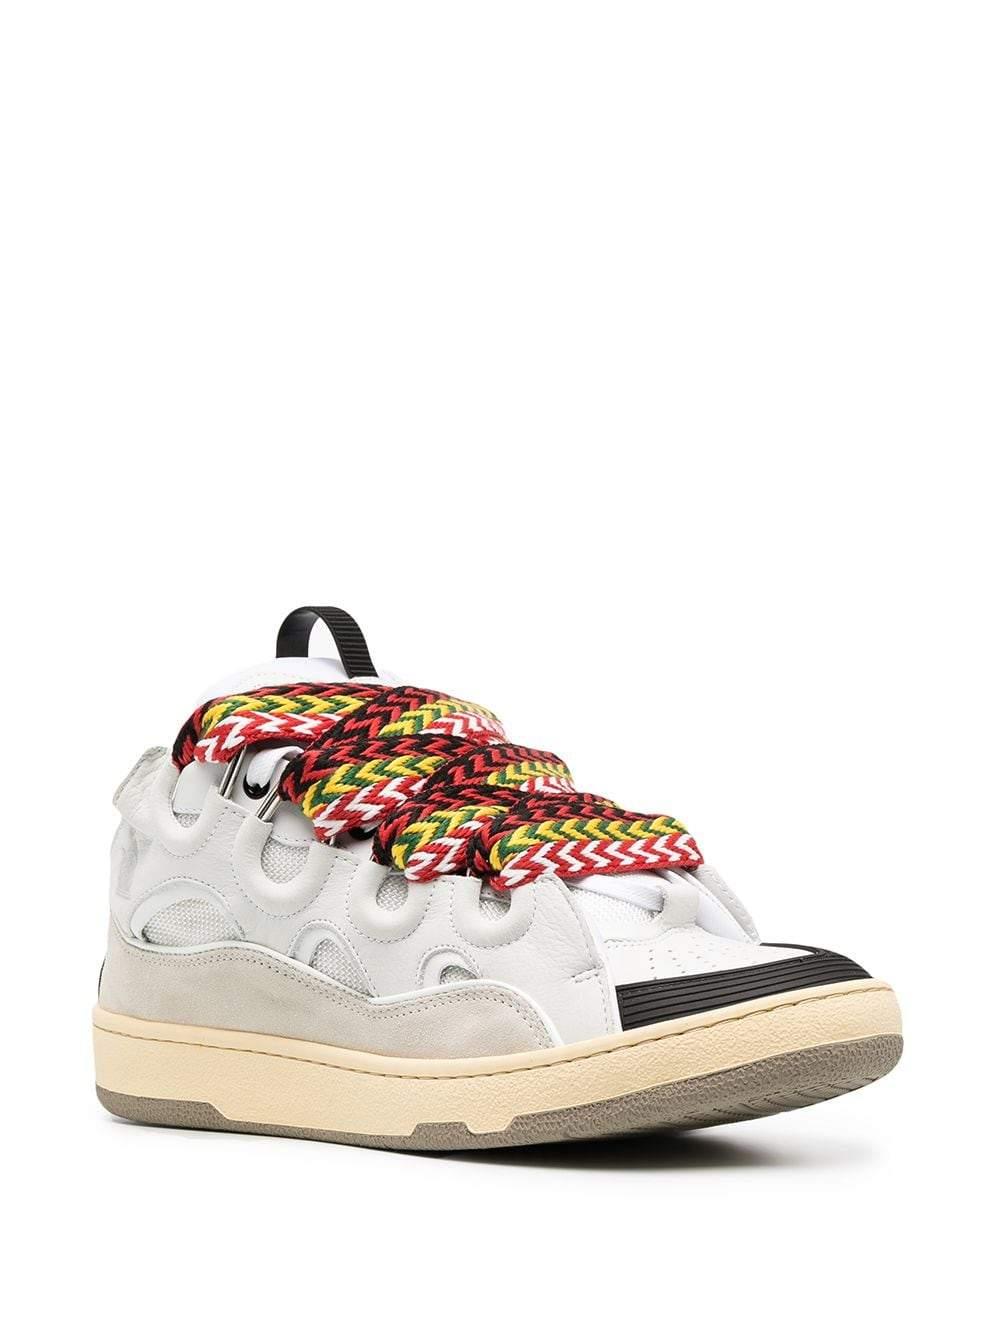 Lanvin Leather Curb Sneakers White for Men - Save 47% - Lyst